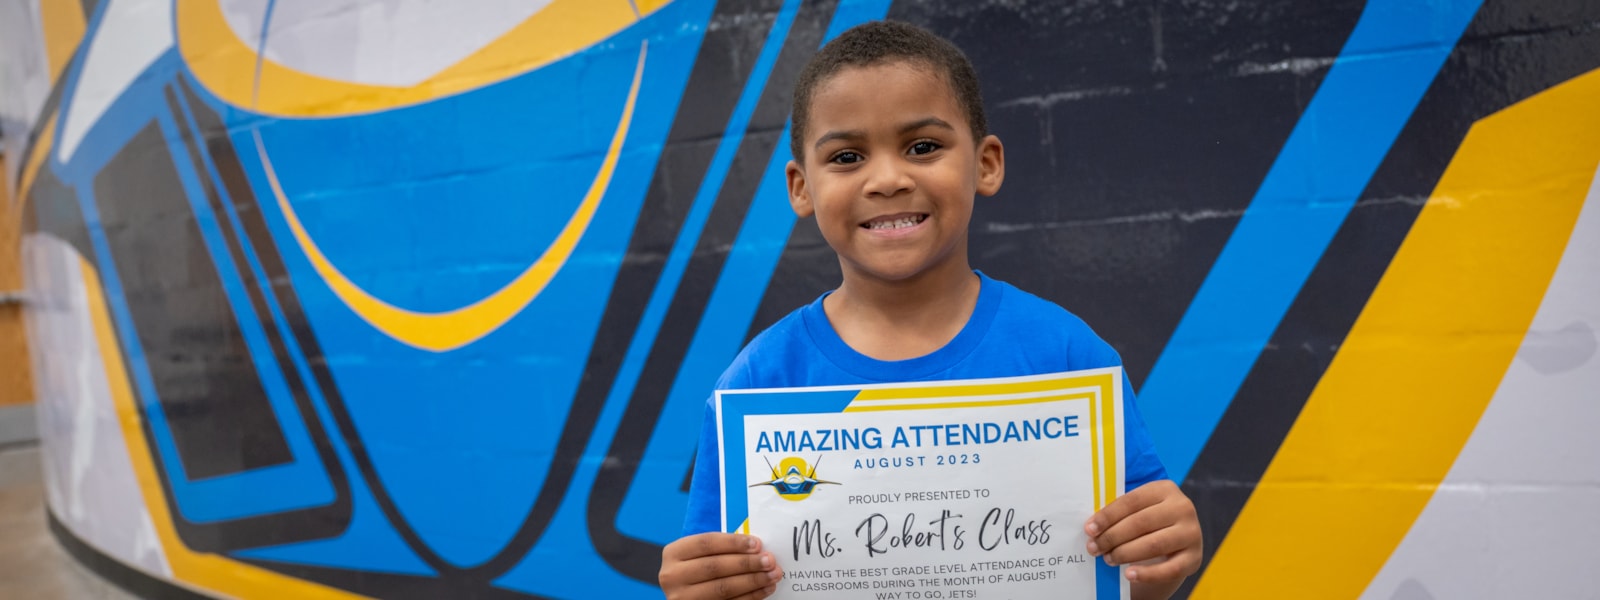 Student with amazing attendance certificate